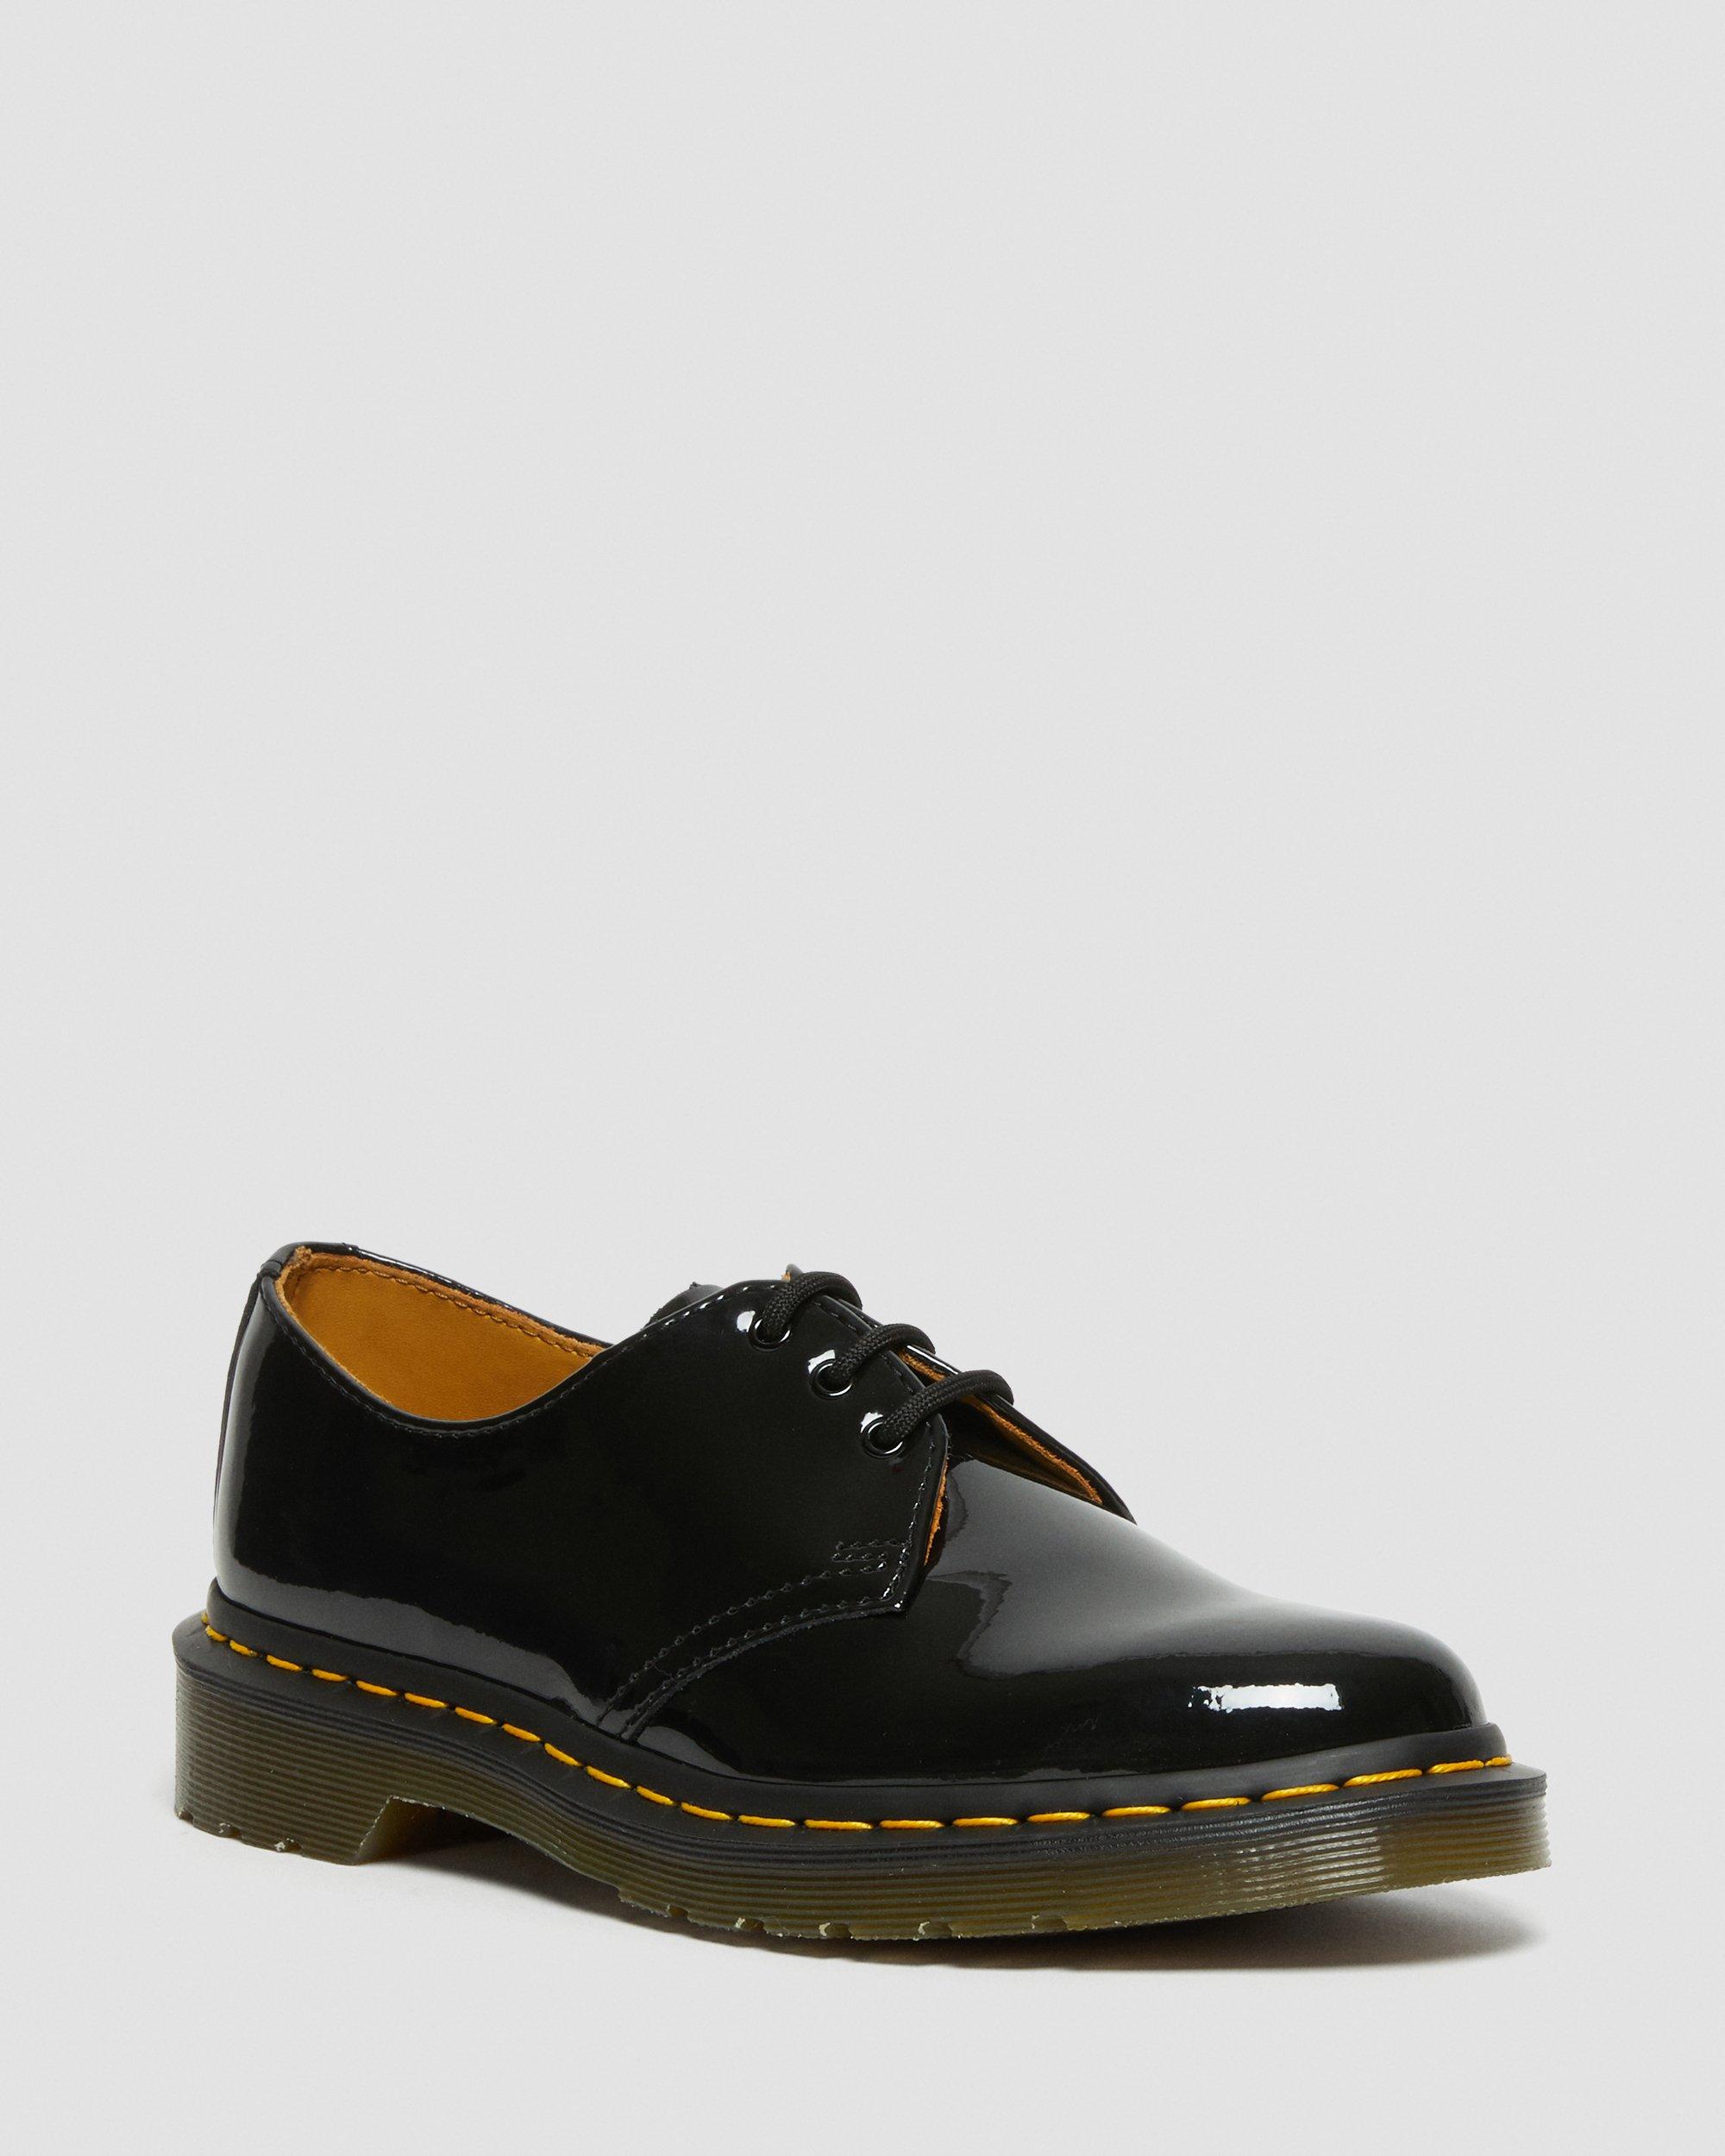 1461 Women's Patent Leather Oxford Shoes1461 Women's Patent Leather Oxford Shoes Dr. Martens